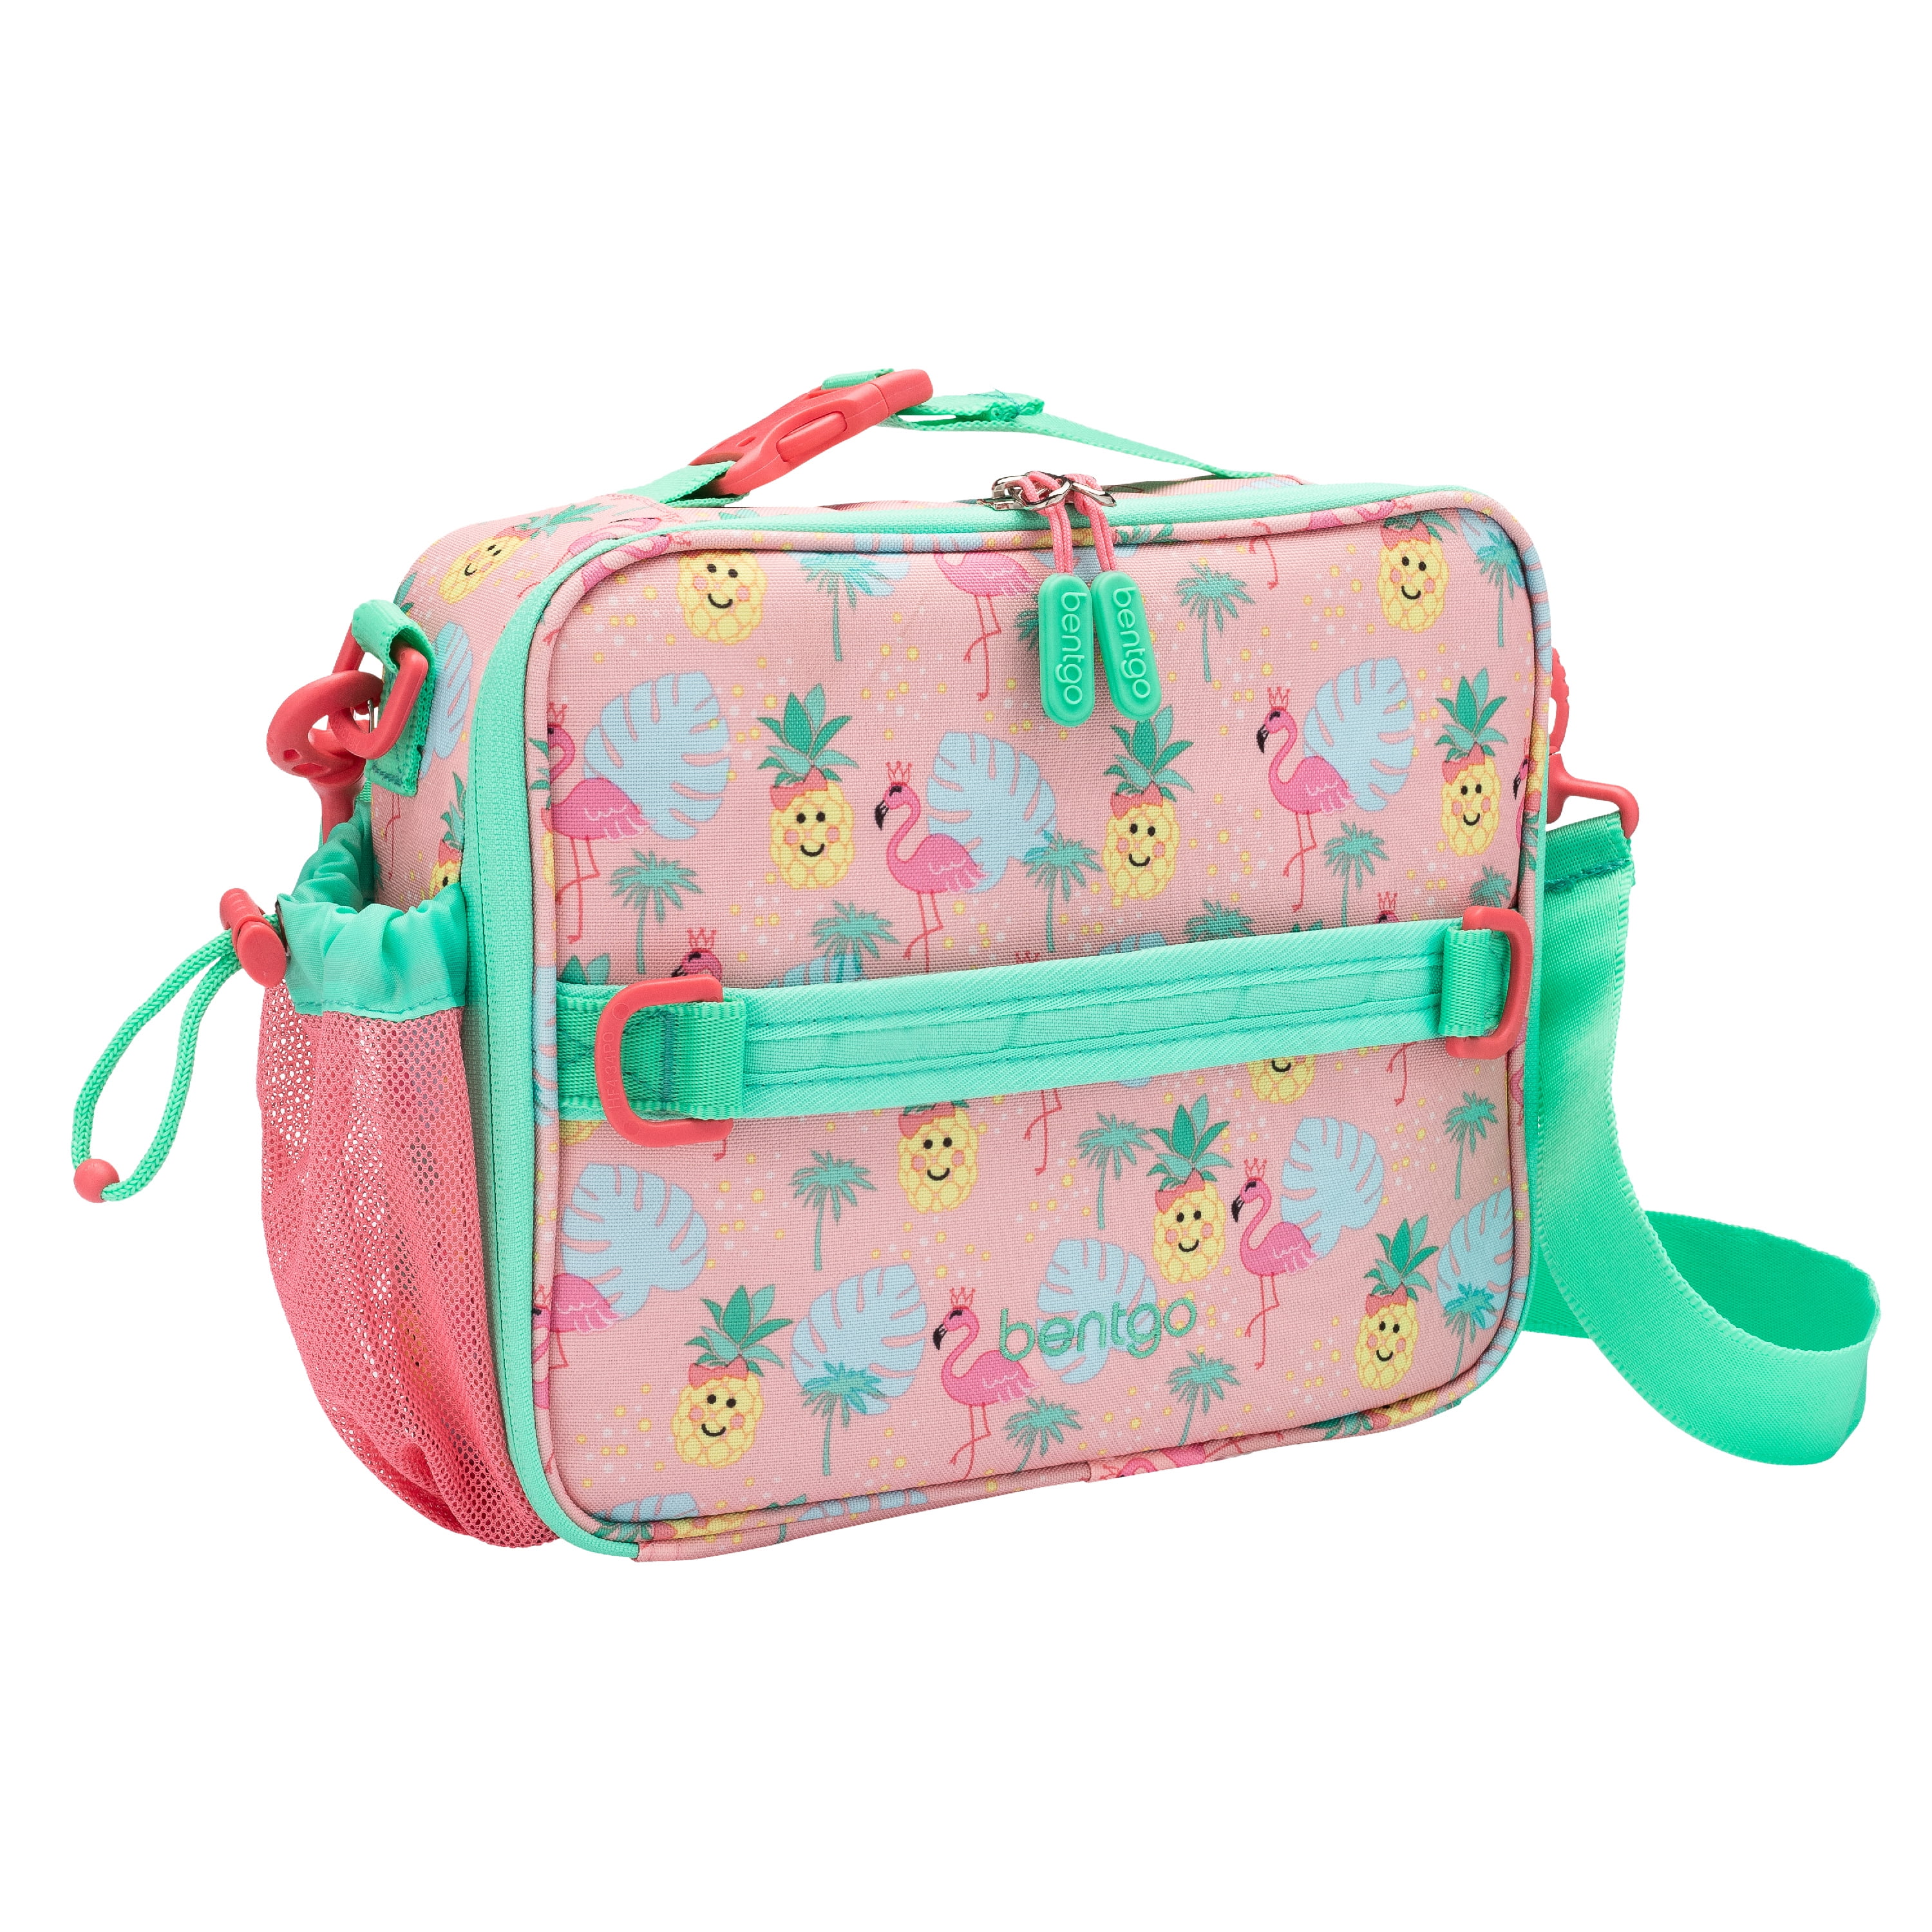  Bentgo 2-in-1 Backpack & Insulated Lunch Bag Set With Kids  Prints Lunch Box (Rainbows and Butterflies): Home & Kitchen